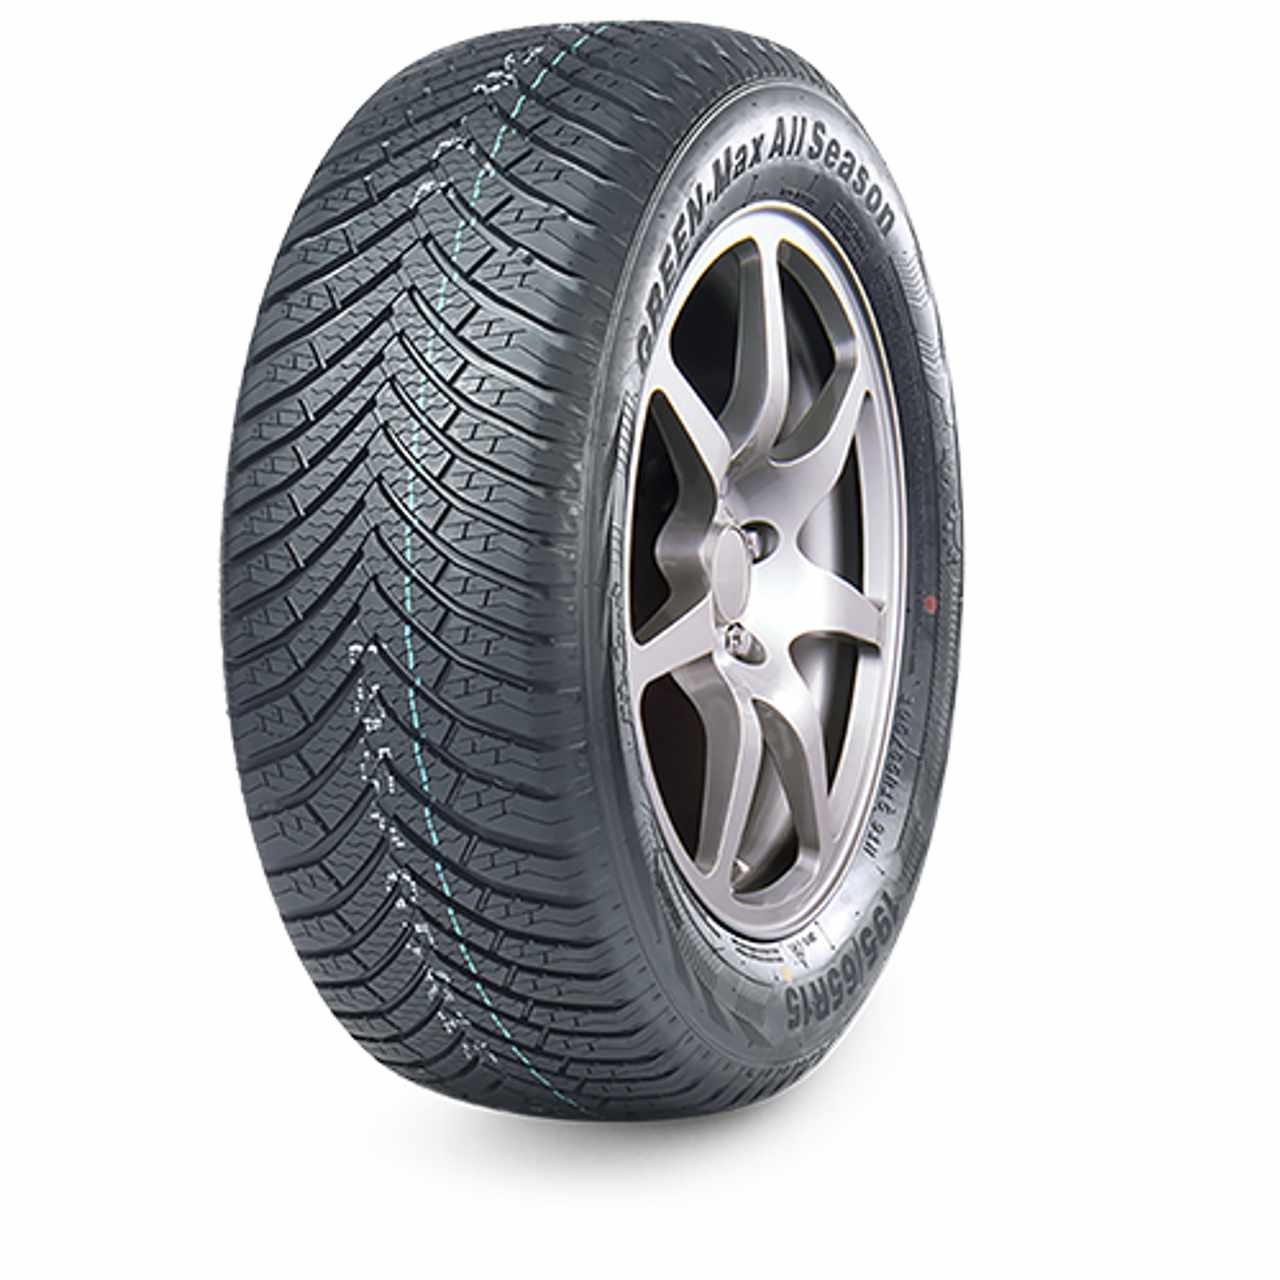 LINGLONG GREEN-MAX ALL SEASON 175/70R14 88T BSW